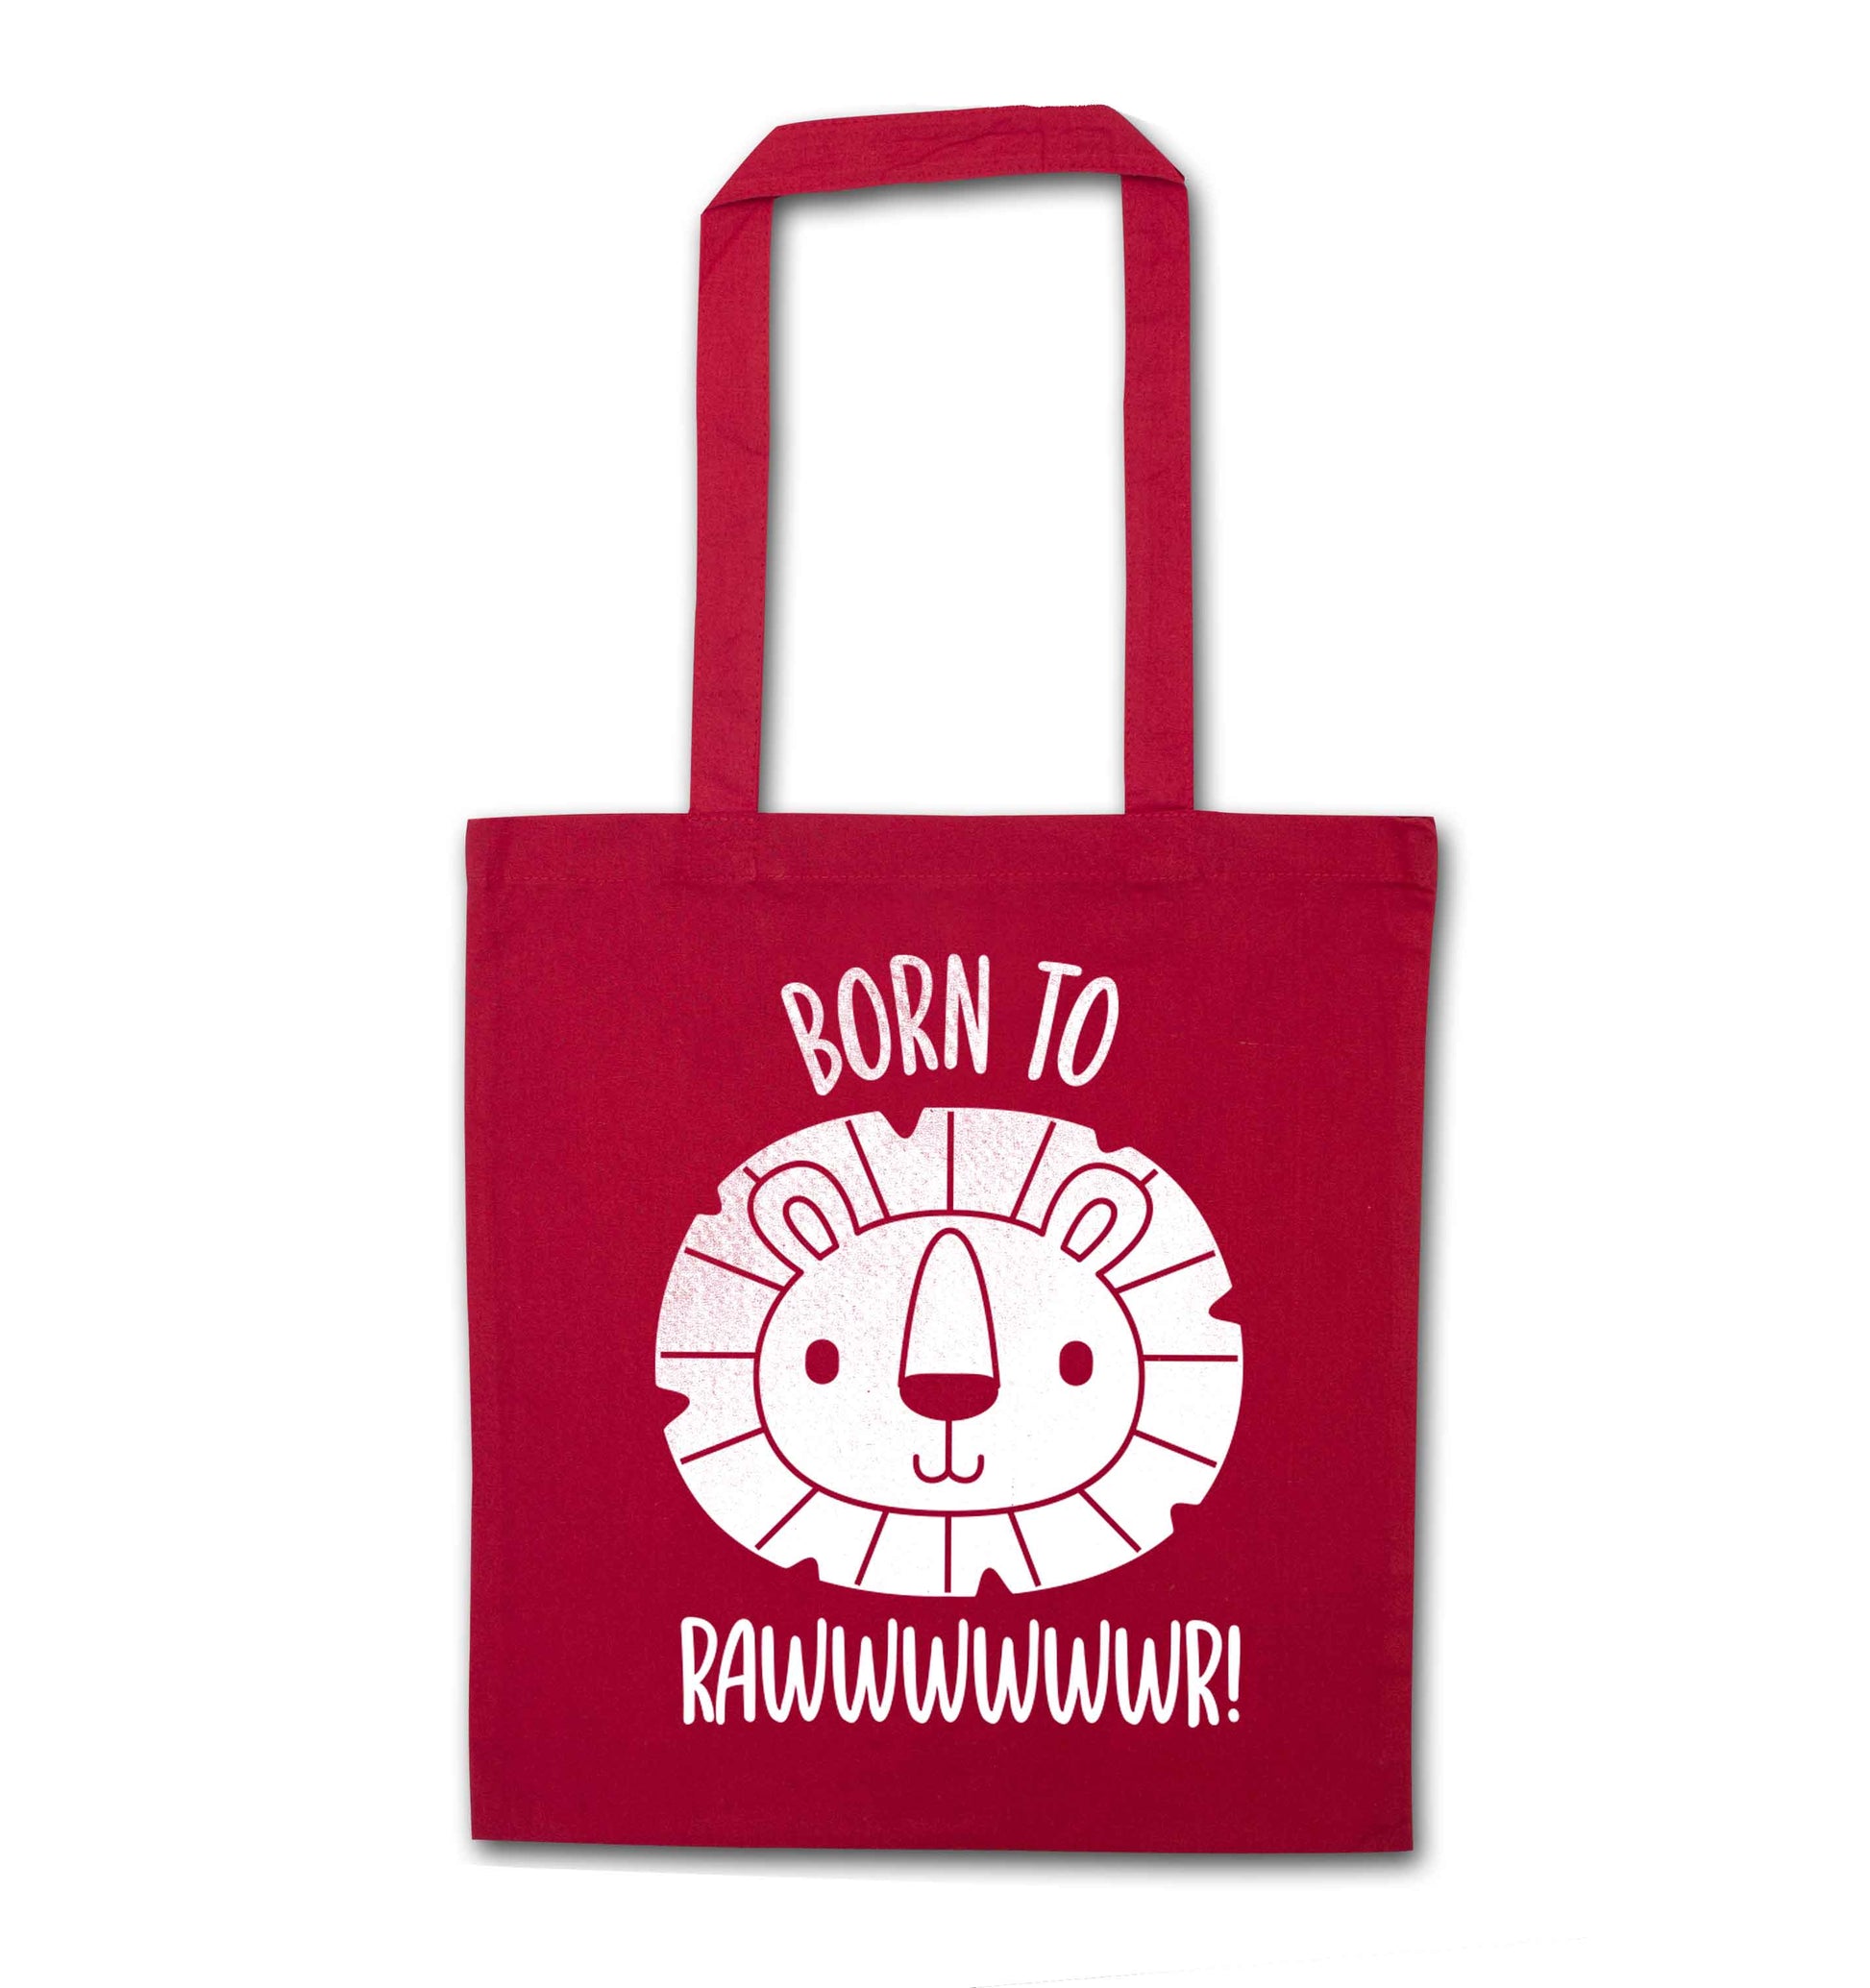 Born to rawr red tote bag